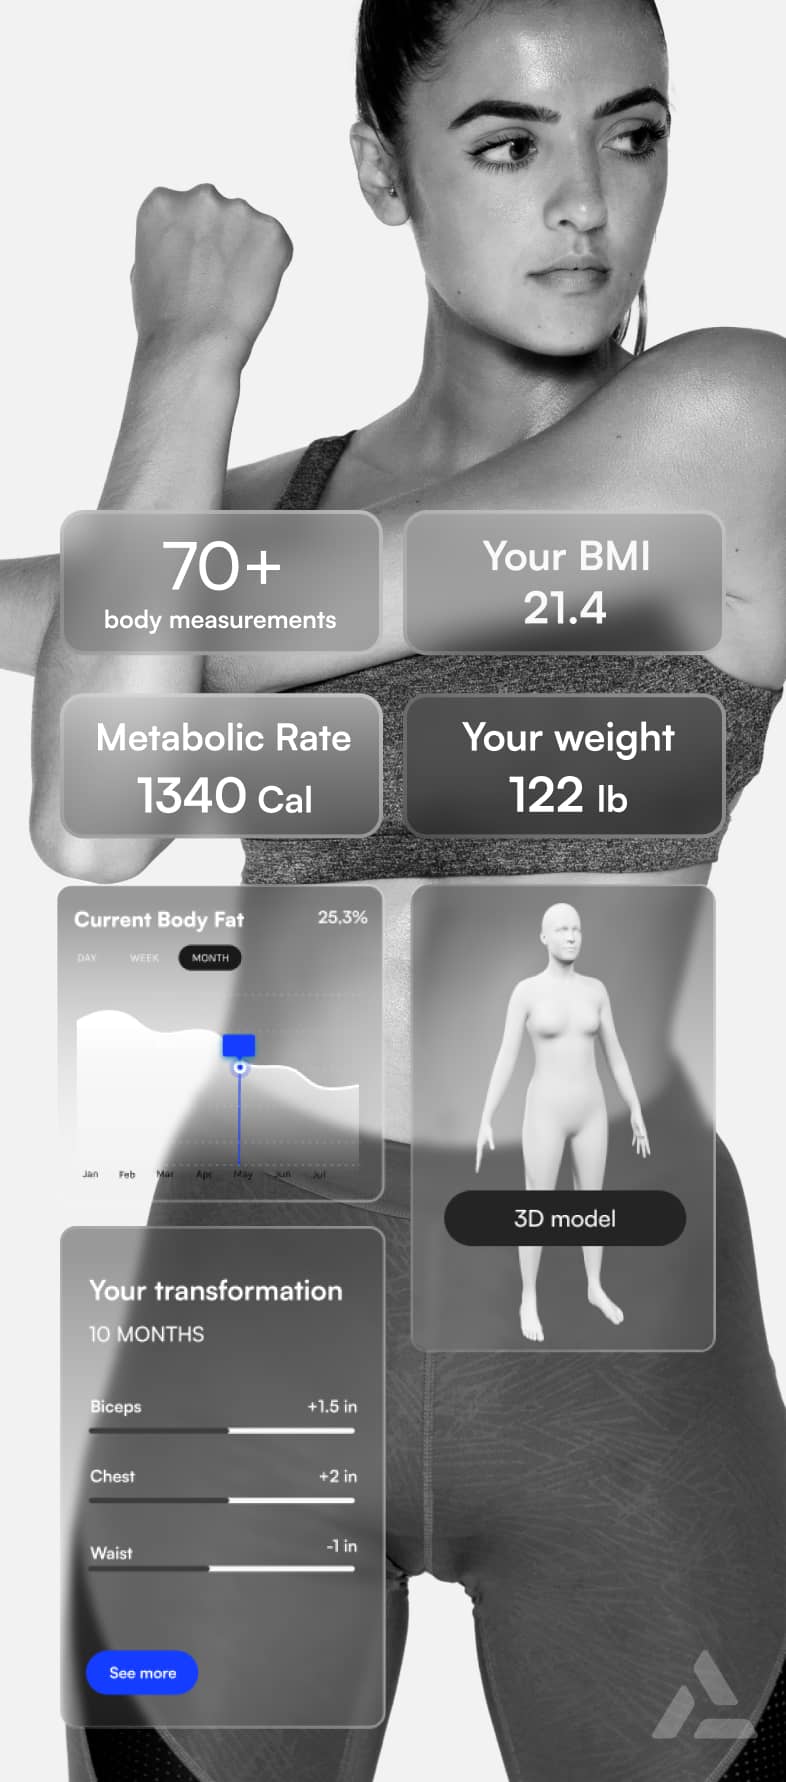 A female athlete's grayscale portrait, beside an interface displaying her bmi, weight, metabolic rate, and an AI-powered 3D body transformation model.